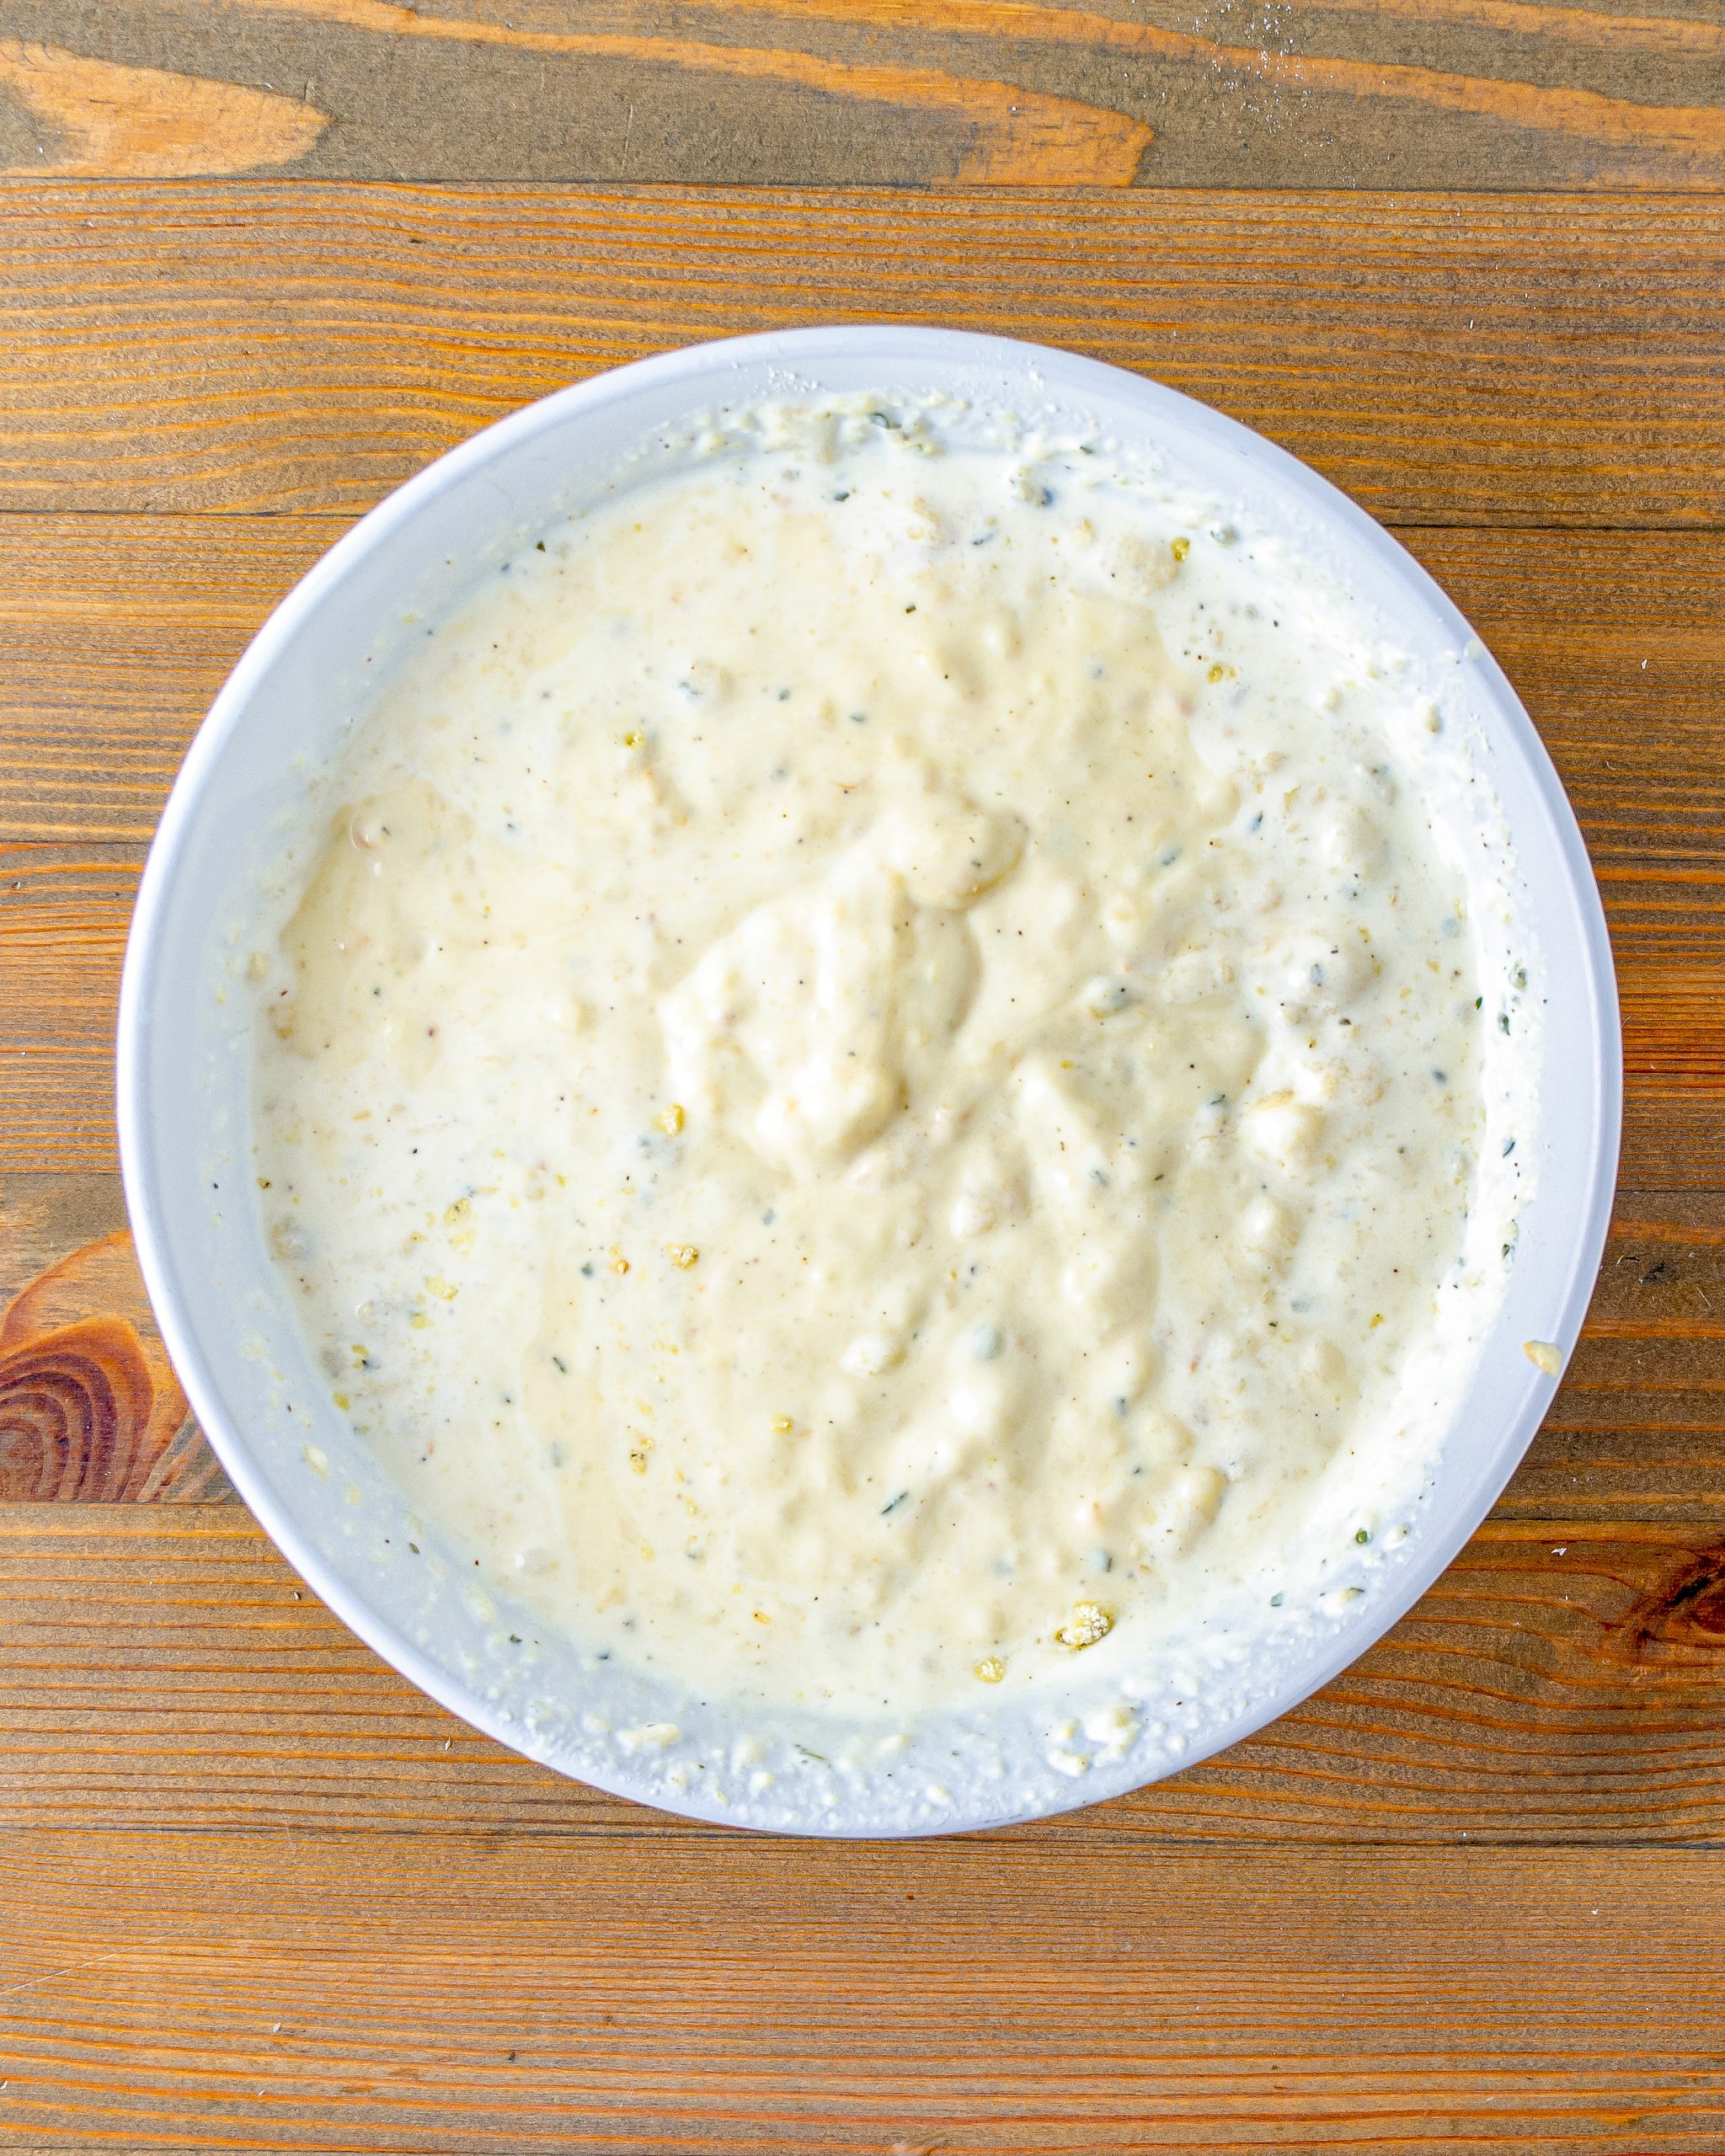 Stir together the soup, ranch seasoning, and milk in a bowl. 